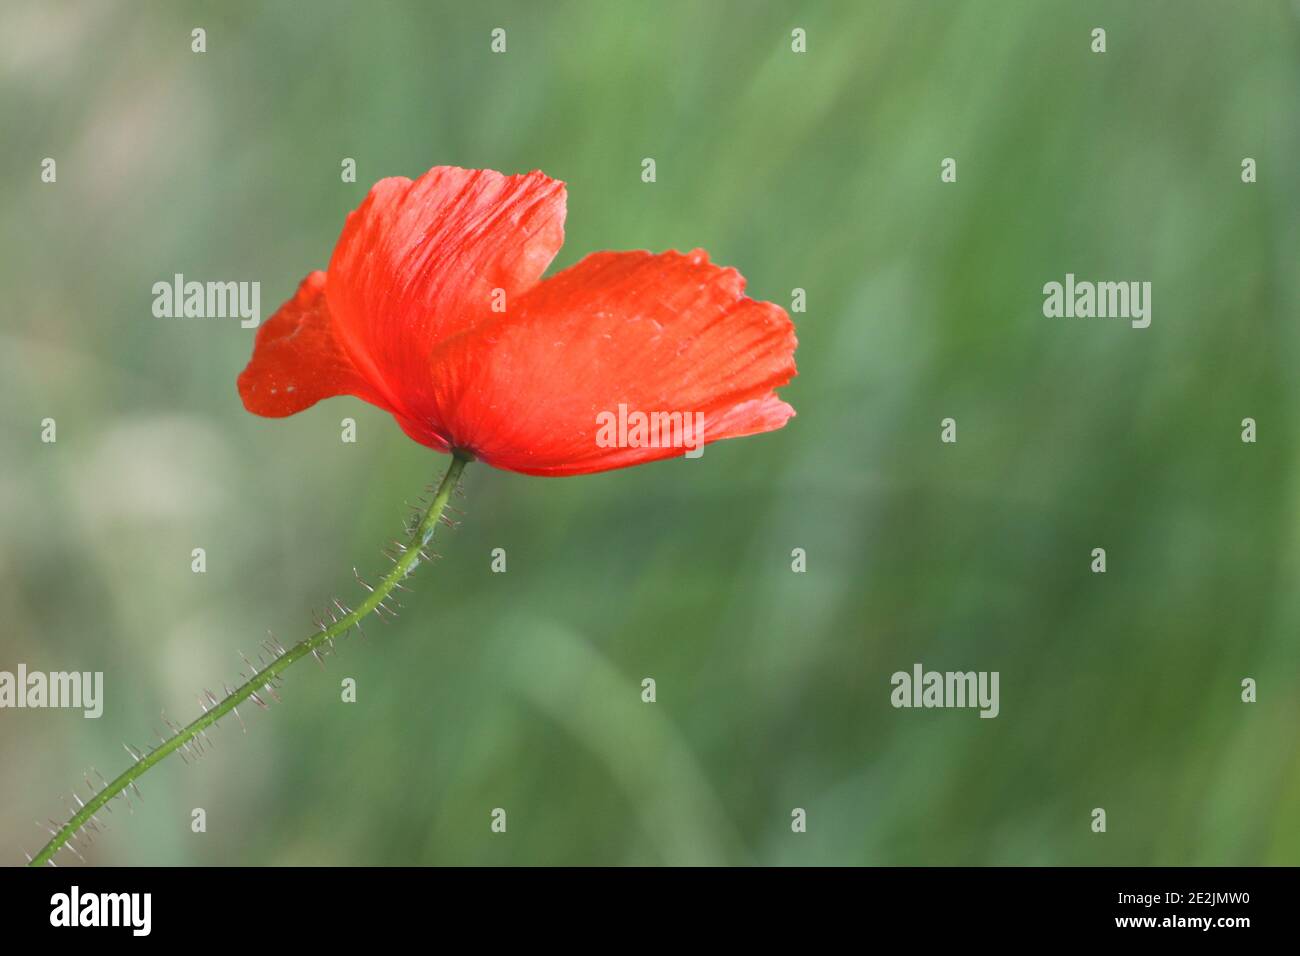 close up of a blooming red poppy flower flower Stock Photo